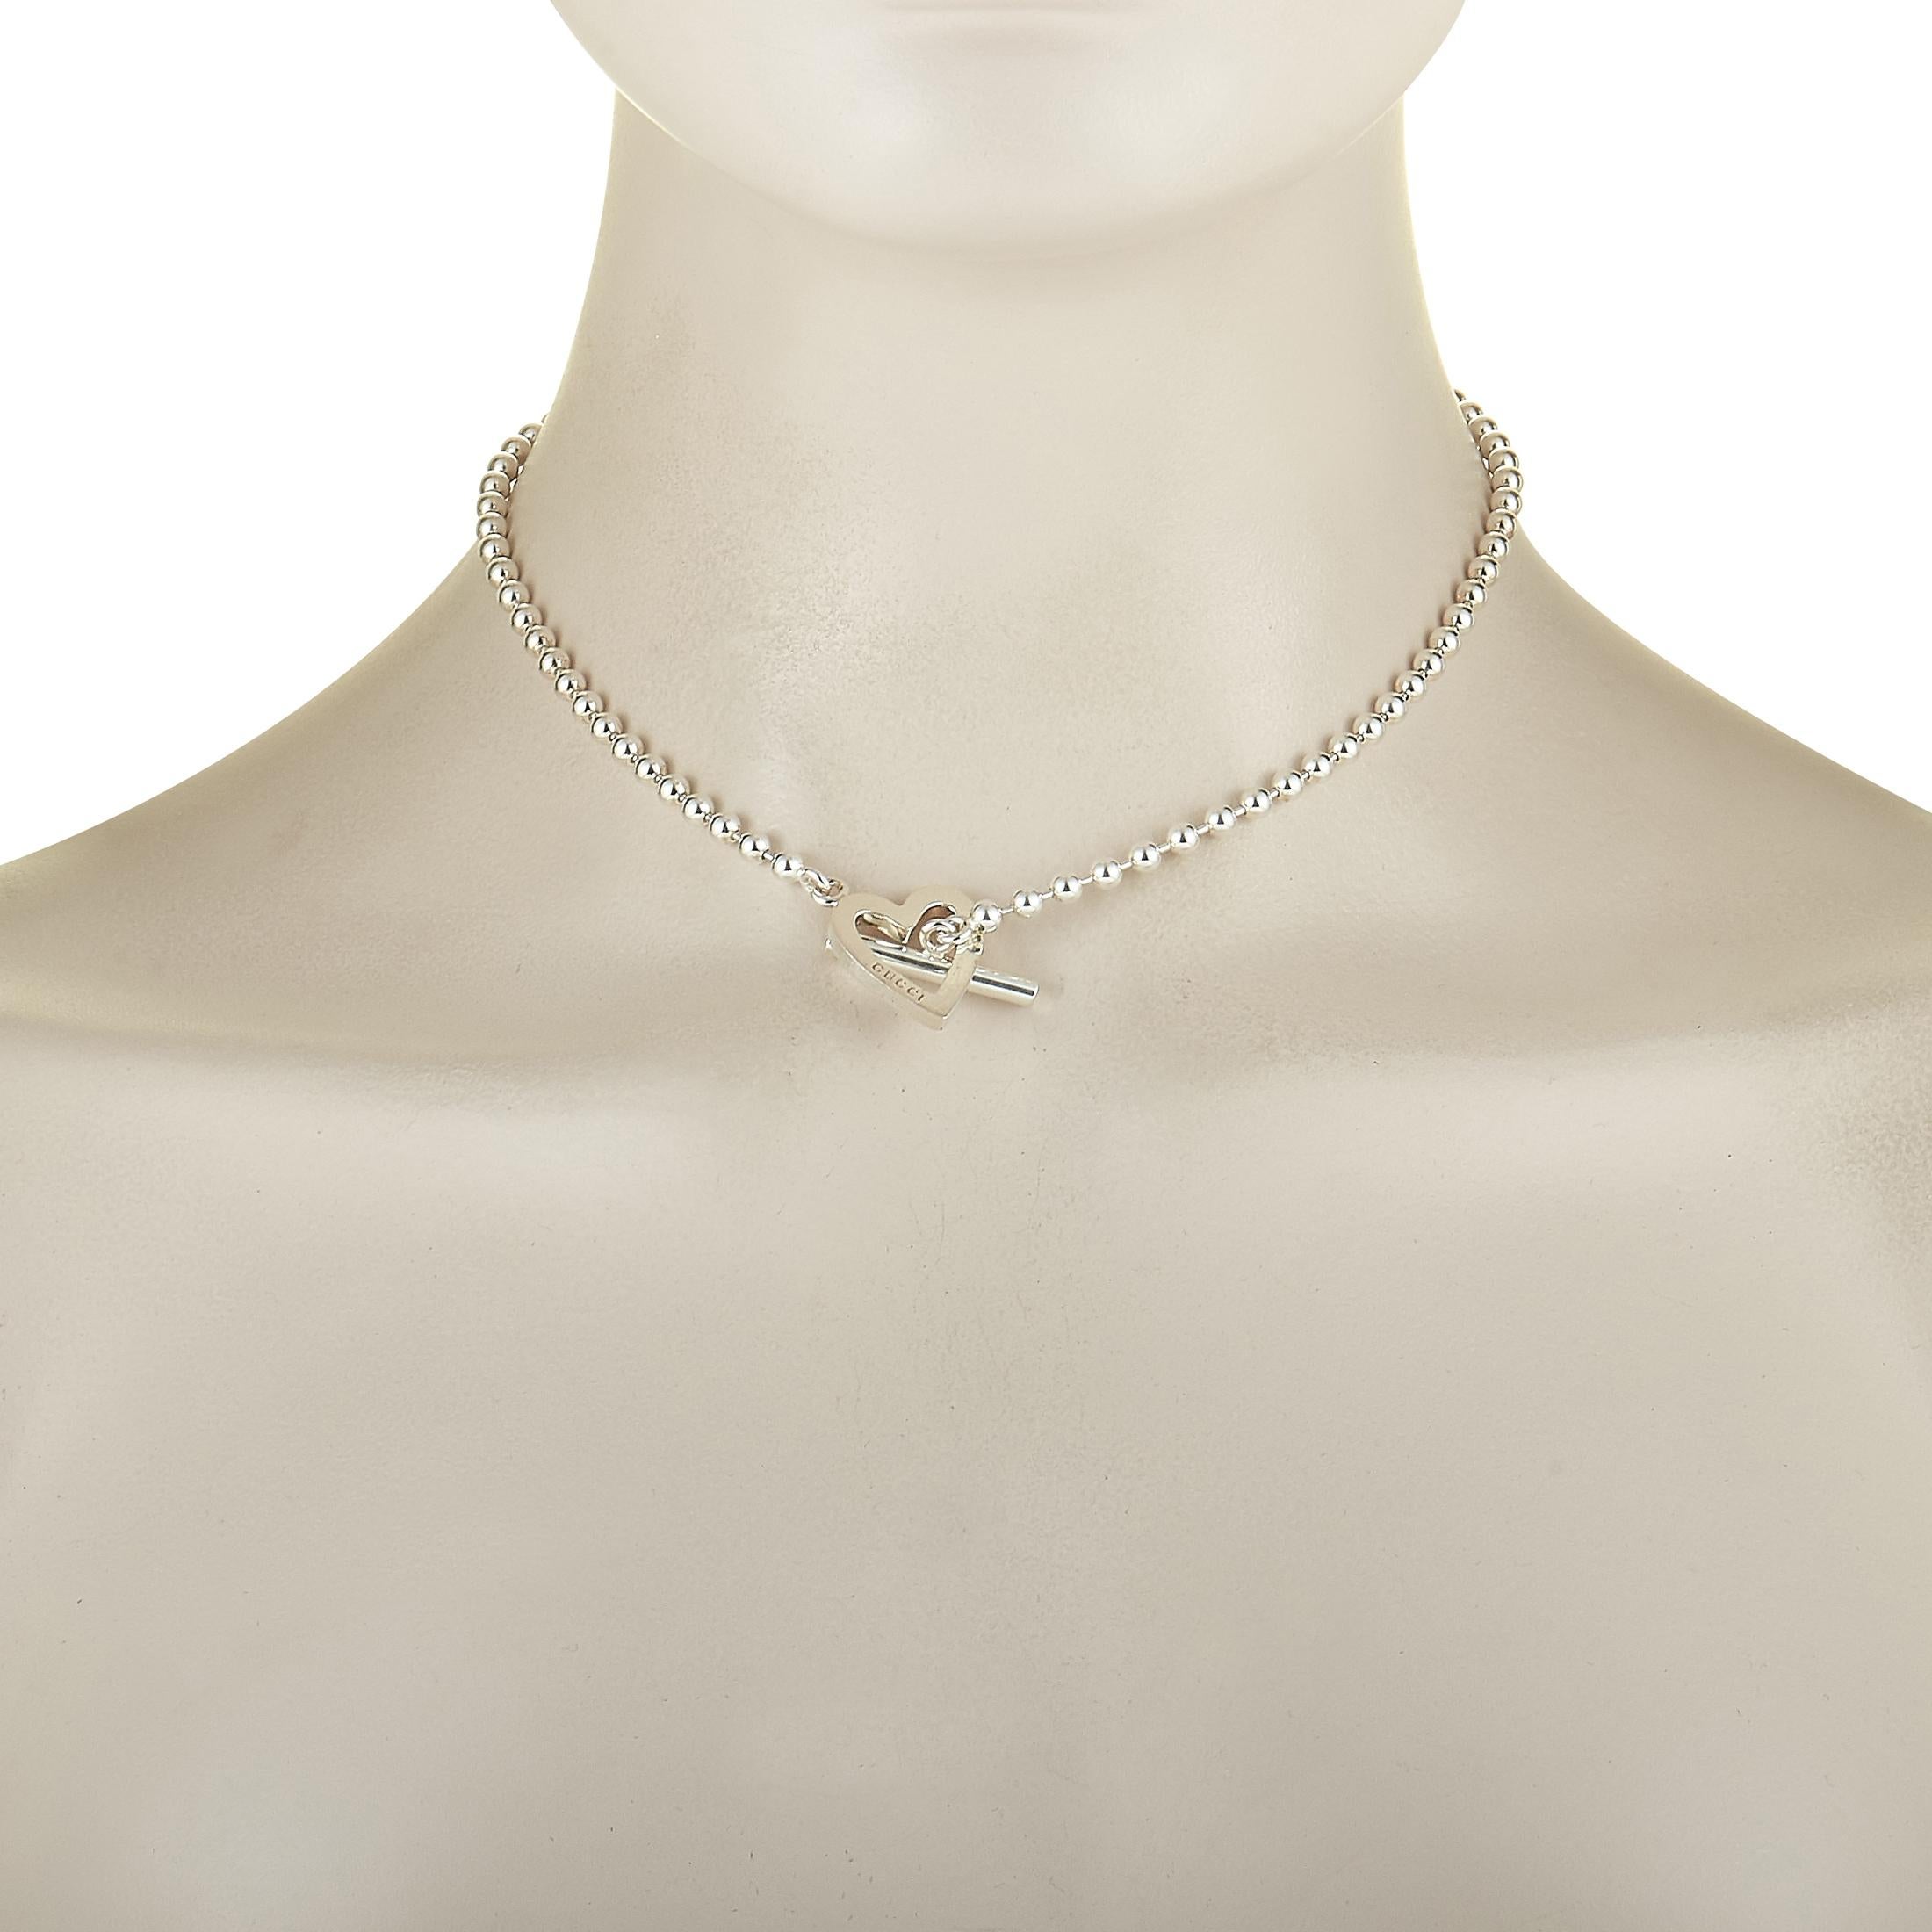 This Gucci necklace is crafted from silver and weighs 24 grams. The necklace boasts a 15” chain and a pendant that measures 0.87” in length and 0.75” in width.
 
 Offered in brand new condition, this jewelry piece includes the manufacturer’s box and